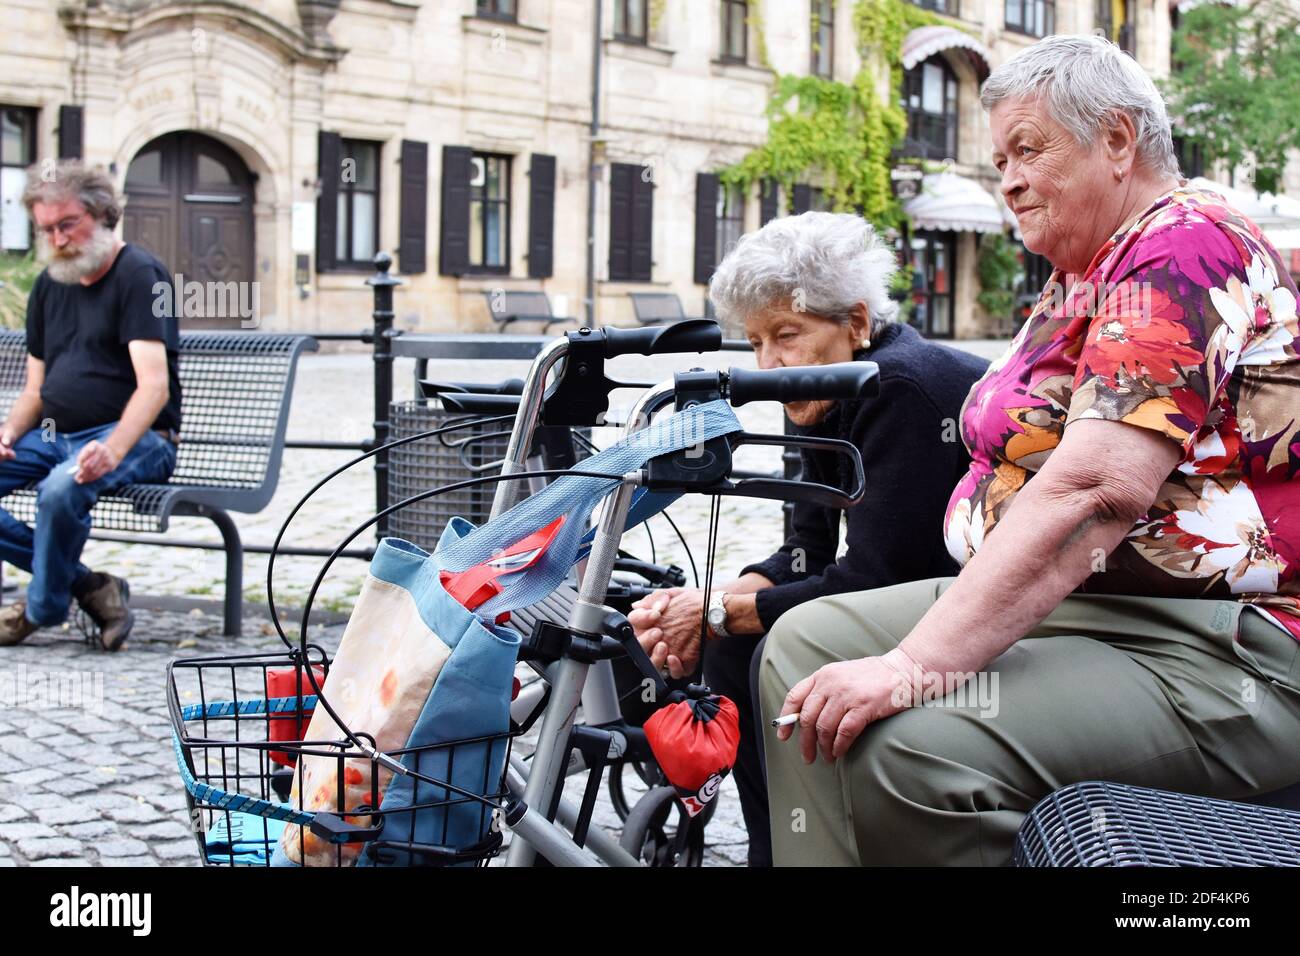 Two elderly women sitting on the bench and smoking in the city center Stock Photo